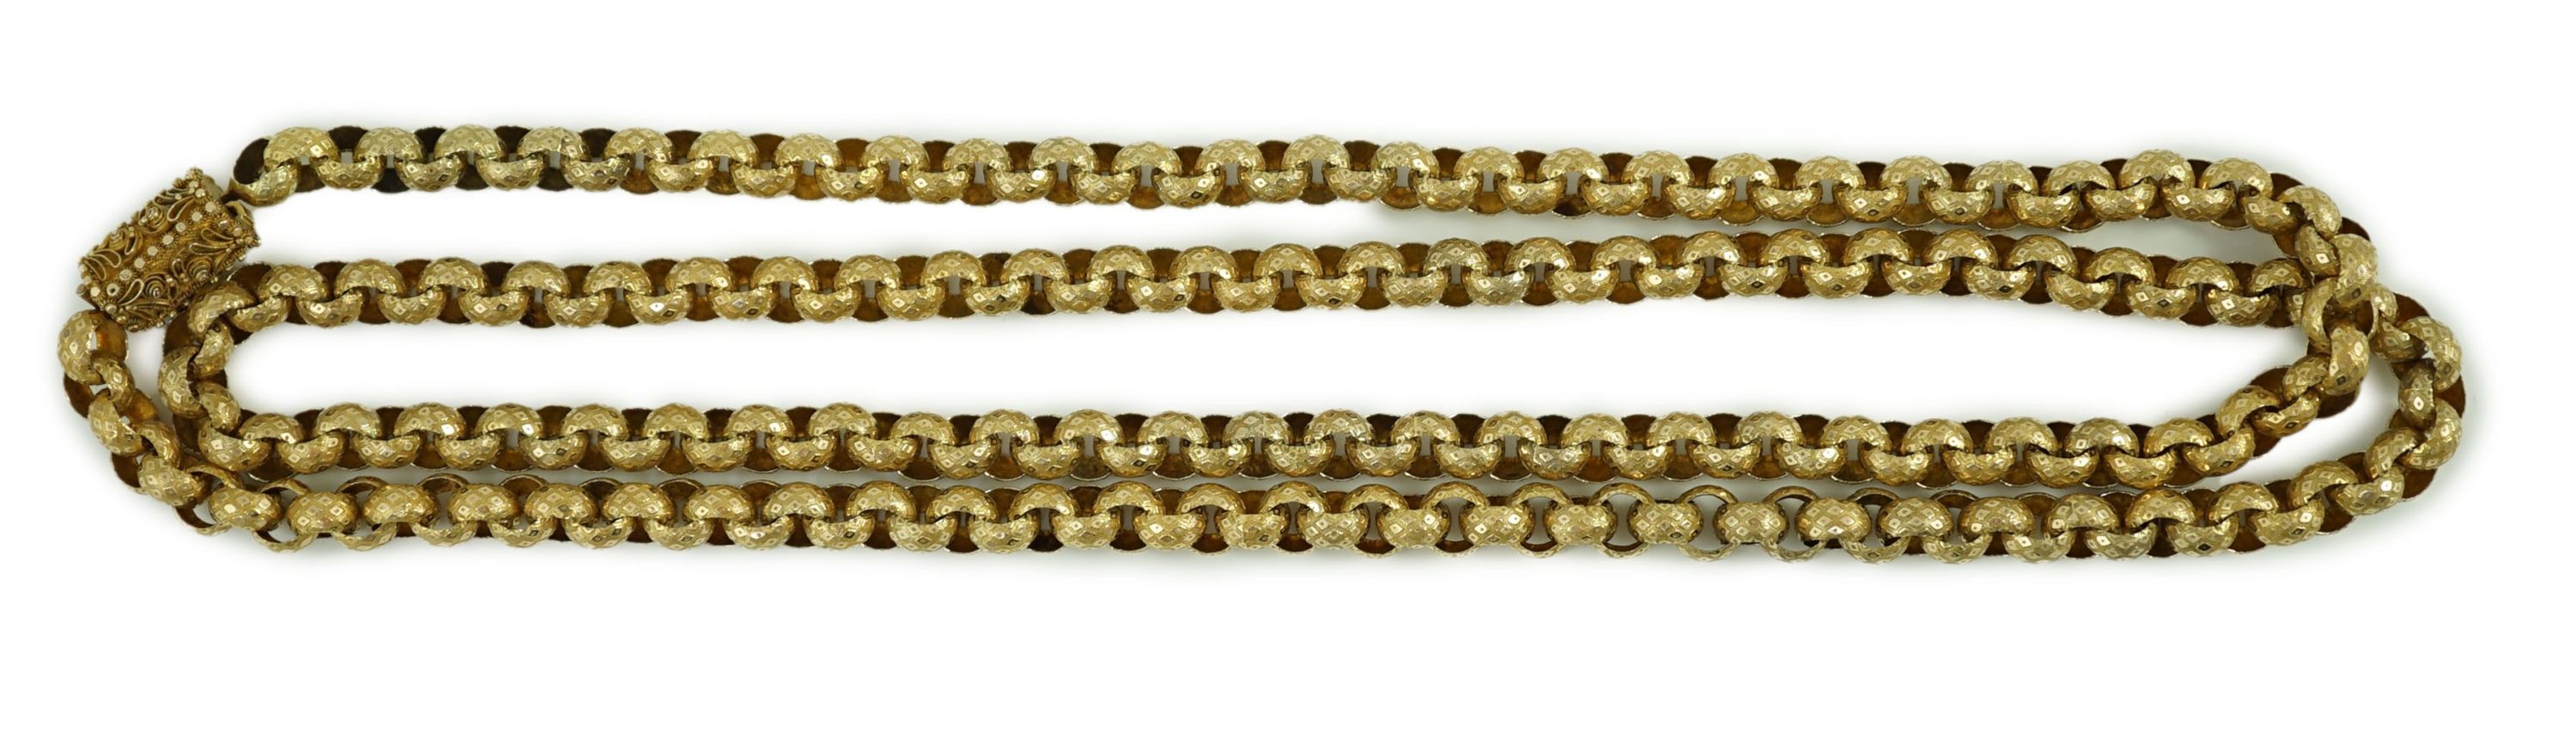 An early 19th century gold muff chain